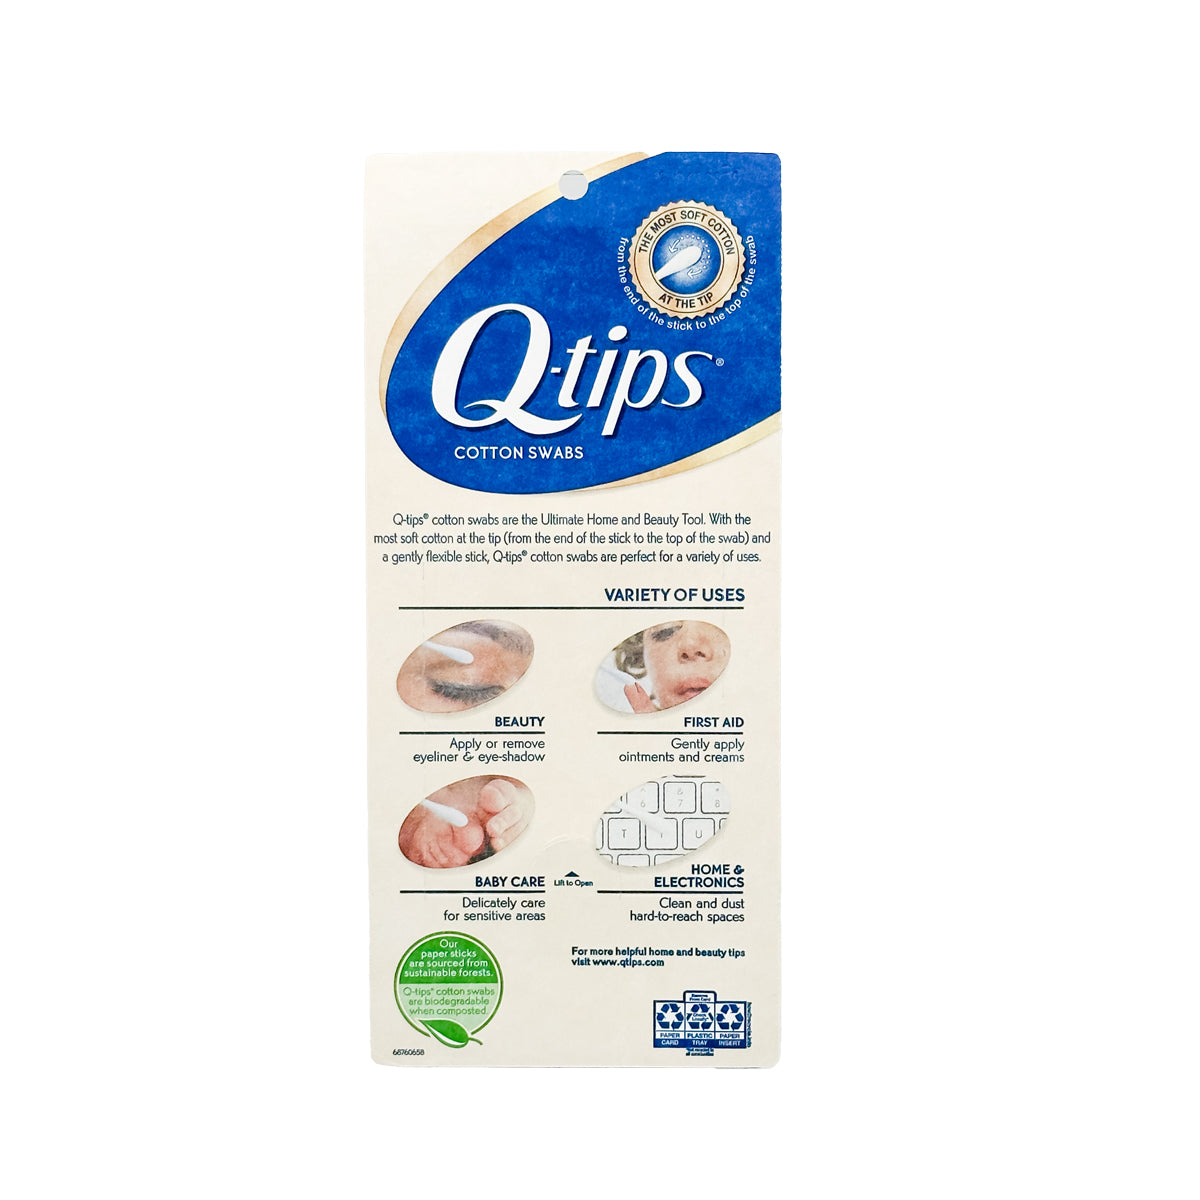 Q-tips Cotton Personal Care